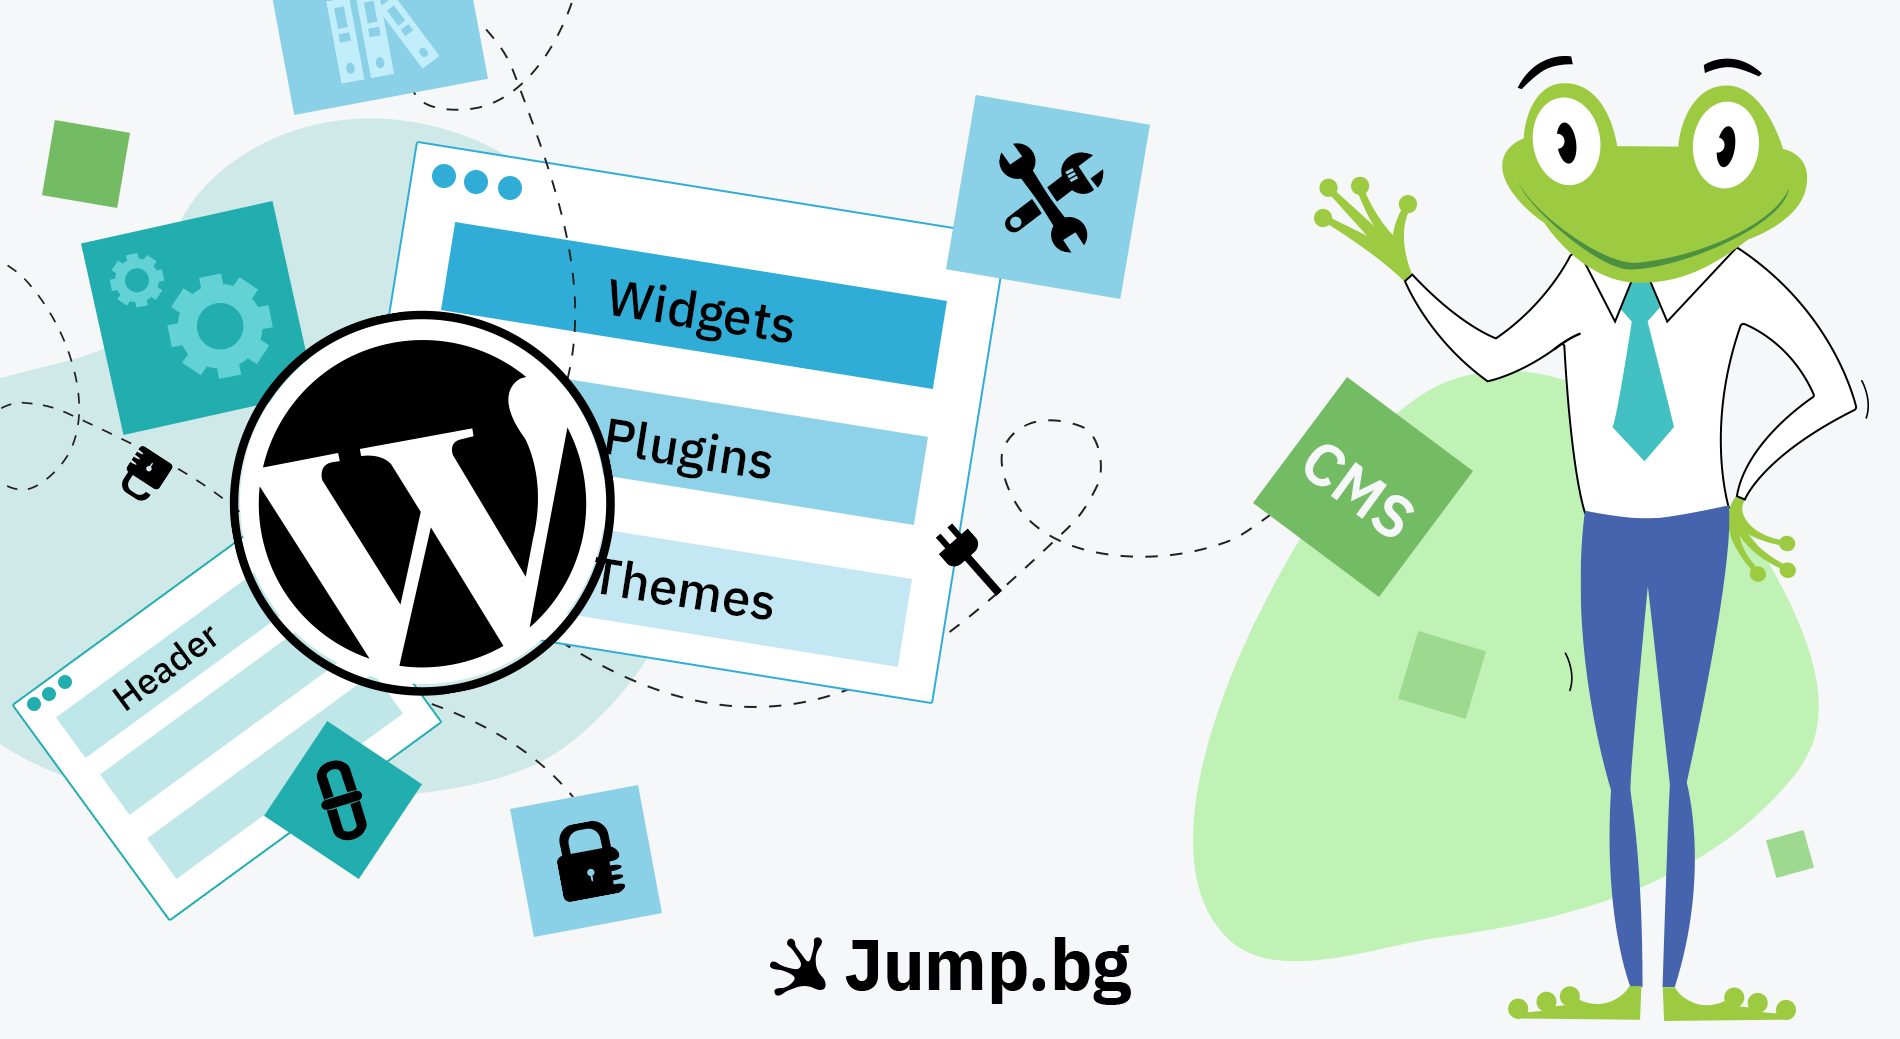 What Is WordPress and Who Is It For?